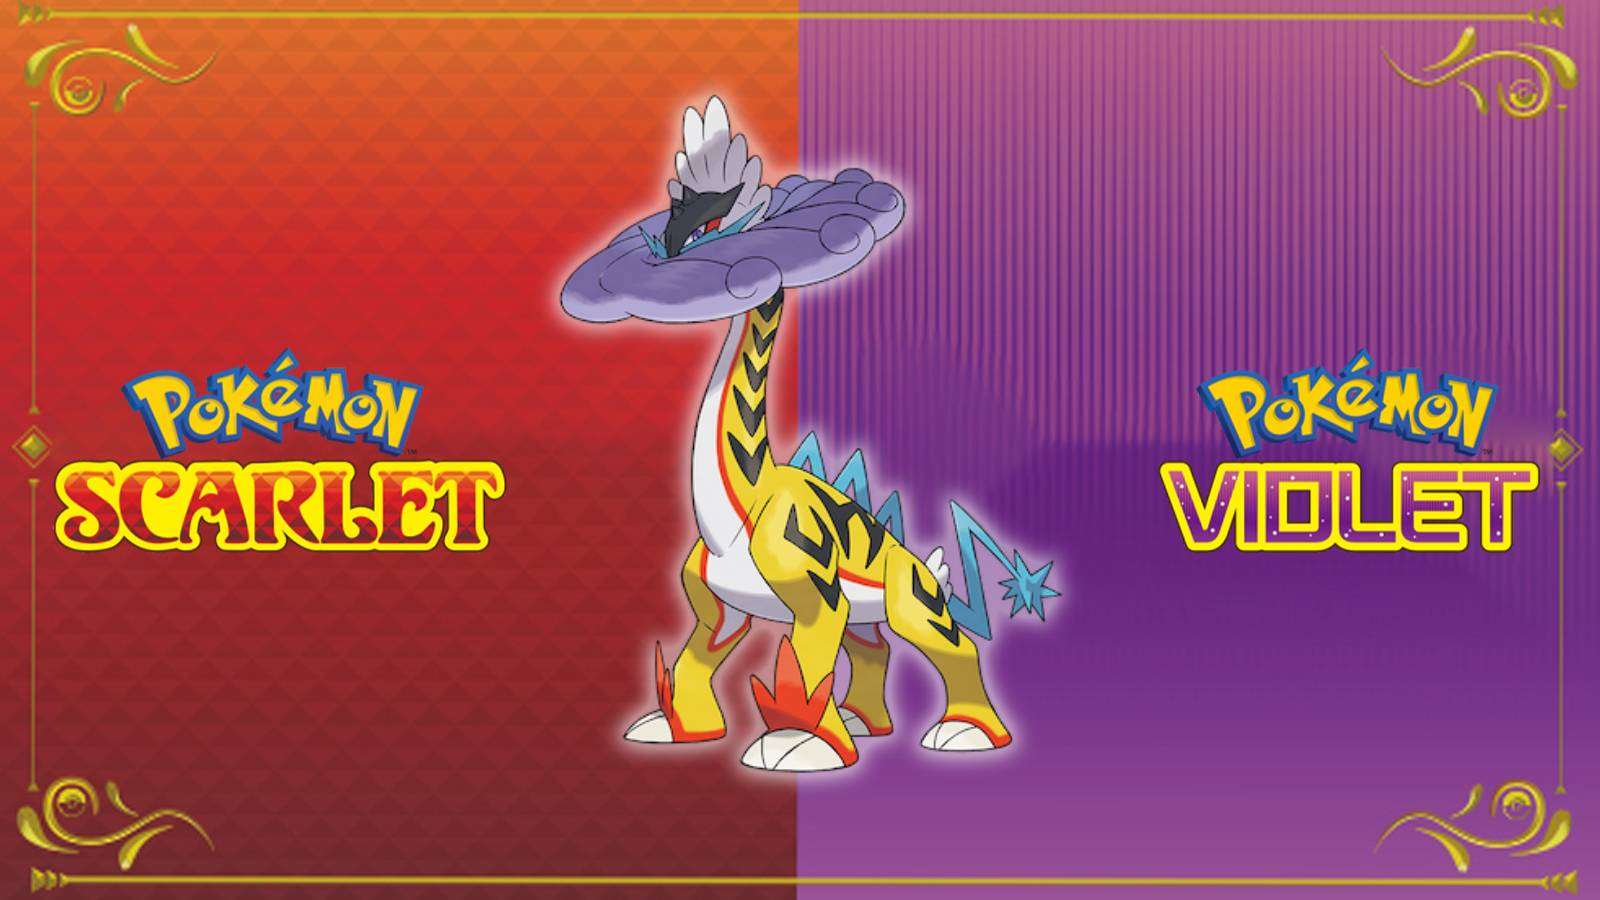 The Pokemon Raging Bolt appears against a background featuring the Pokemon Scarlet & Violet logos.